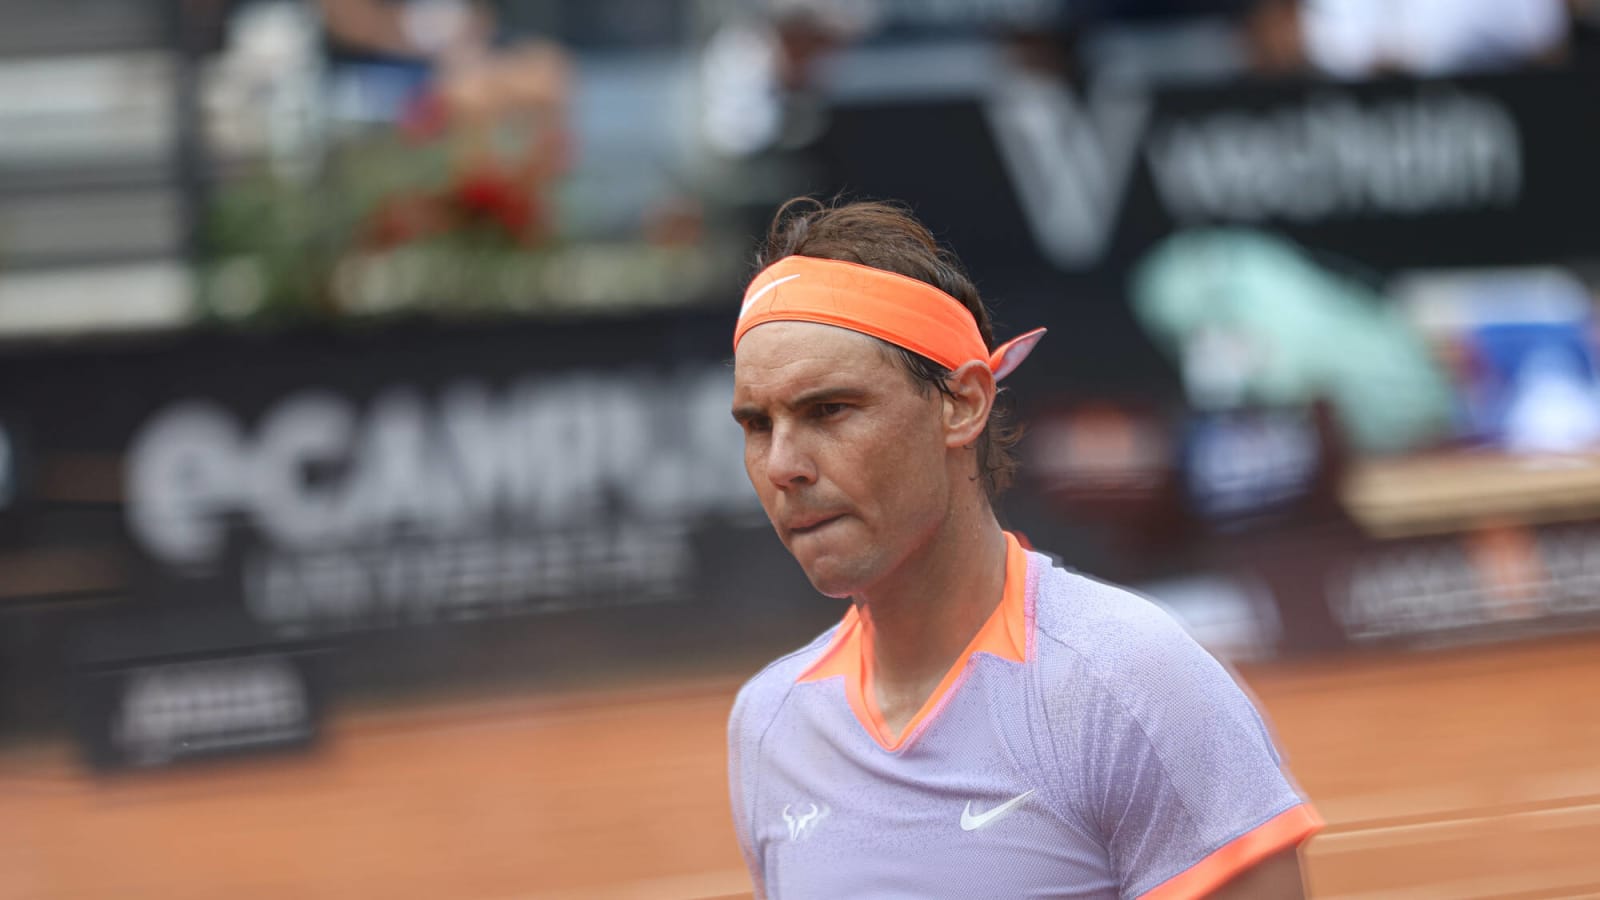 'I never said that it’s going to be my last tournament here,' Rafael Nadal brushes aside retirement rumors as he hints about coming back to Rome next year